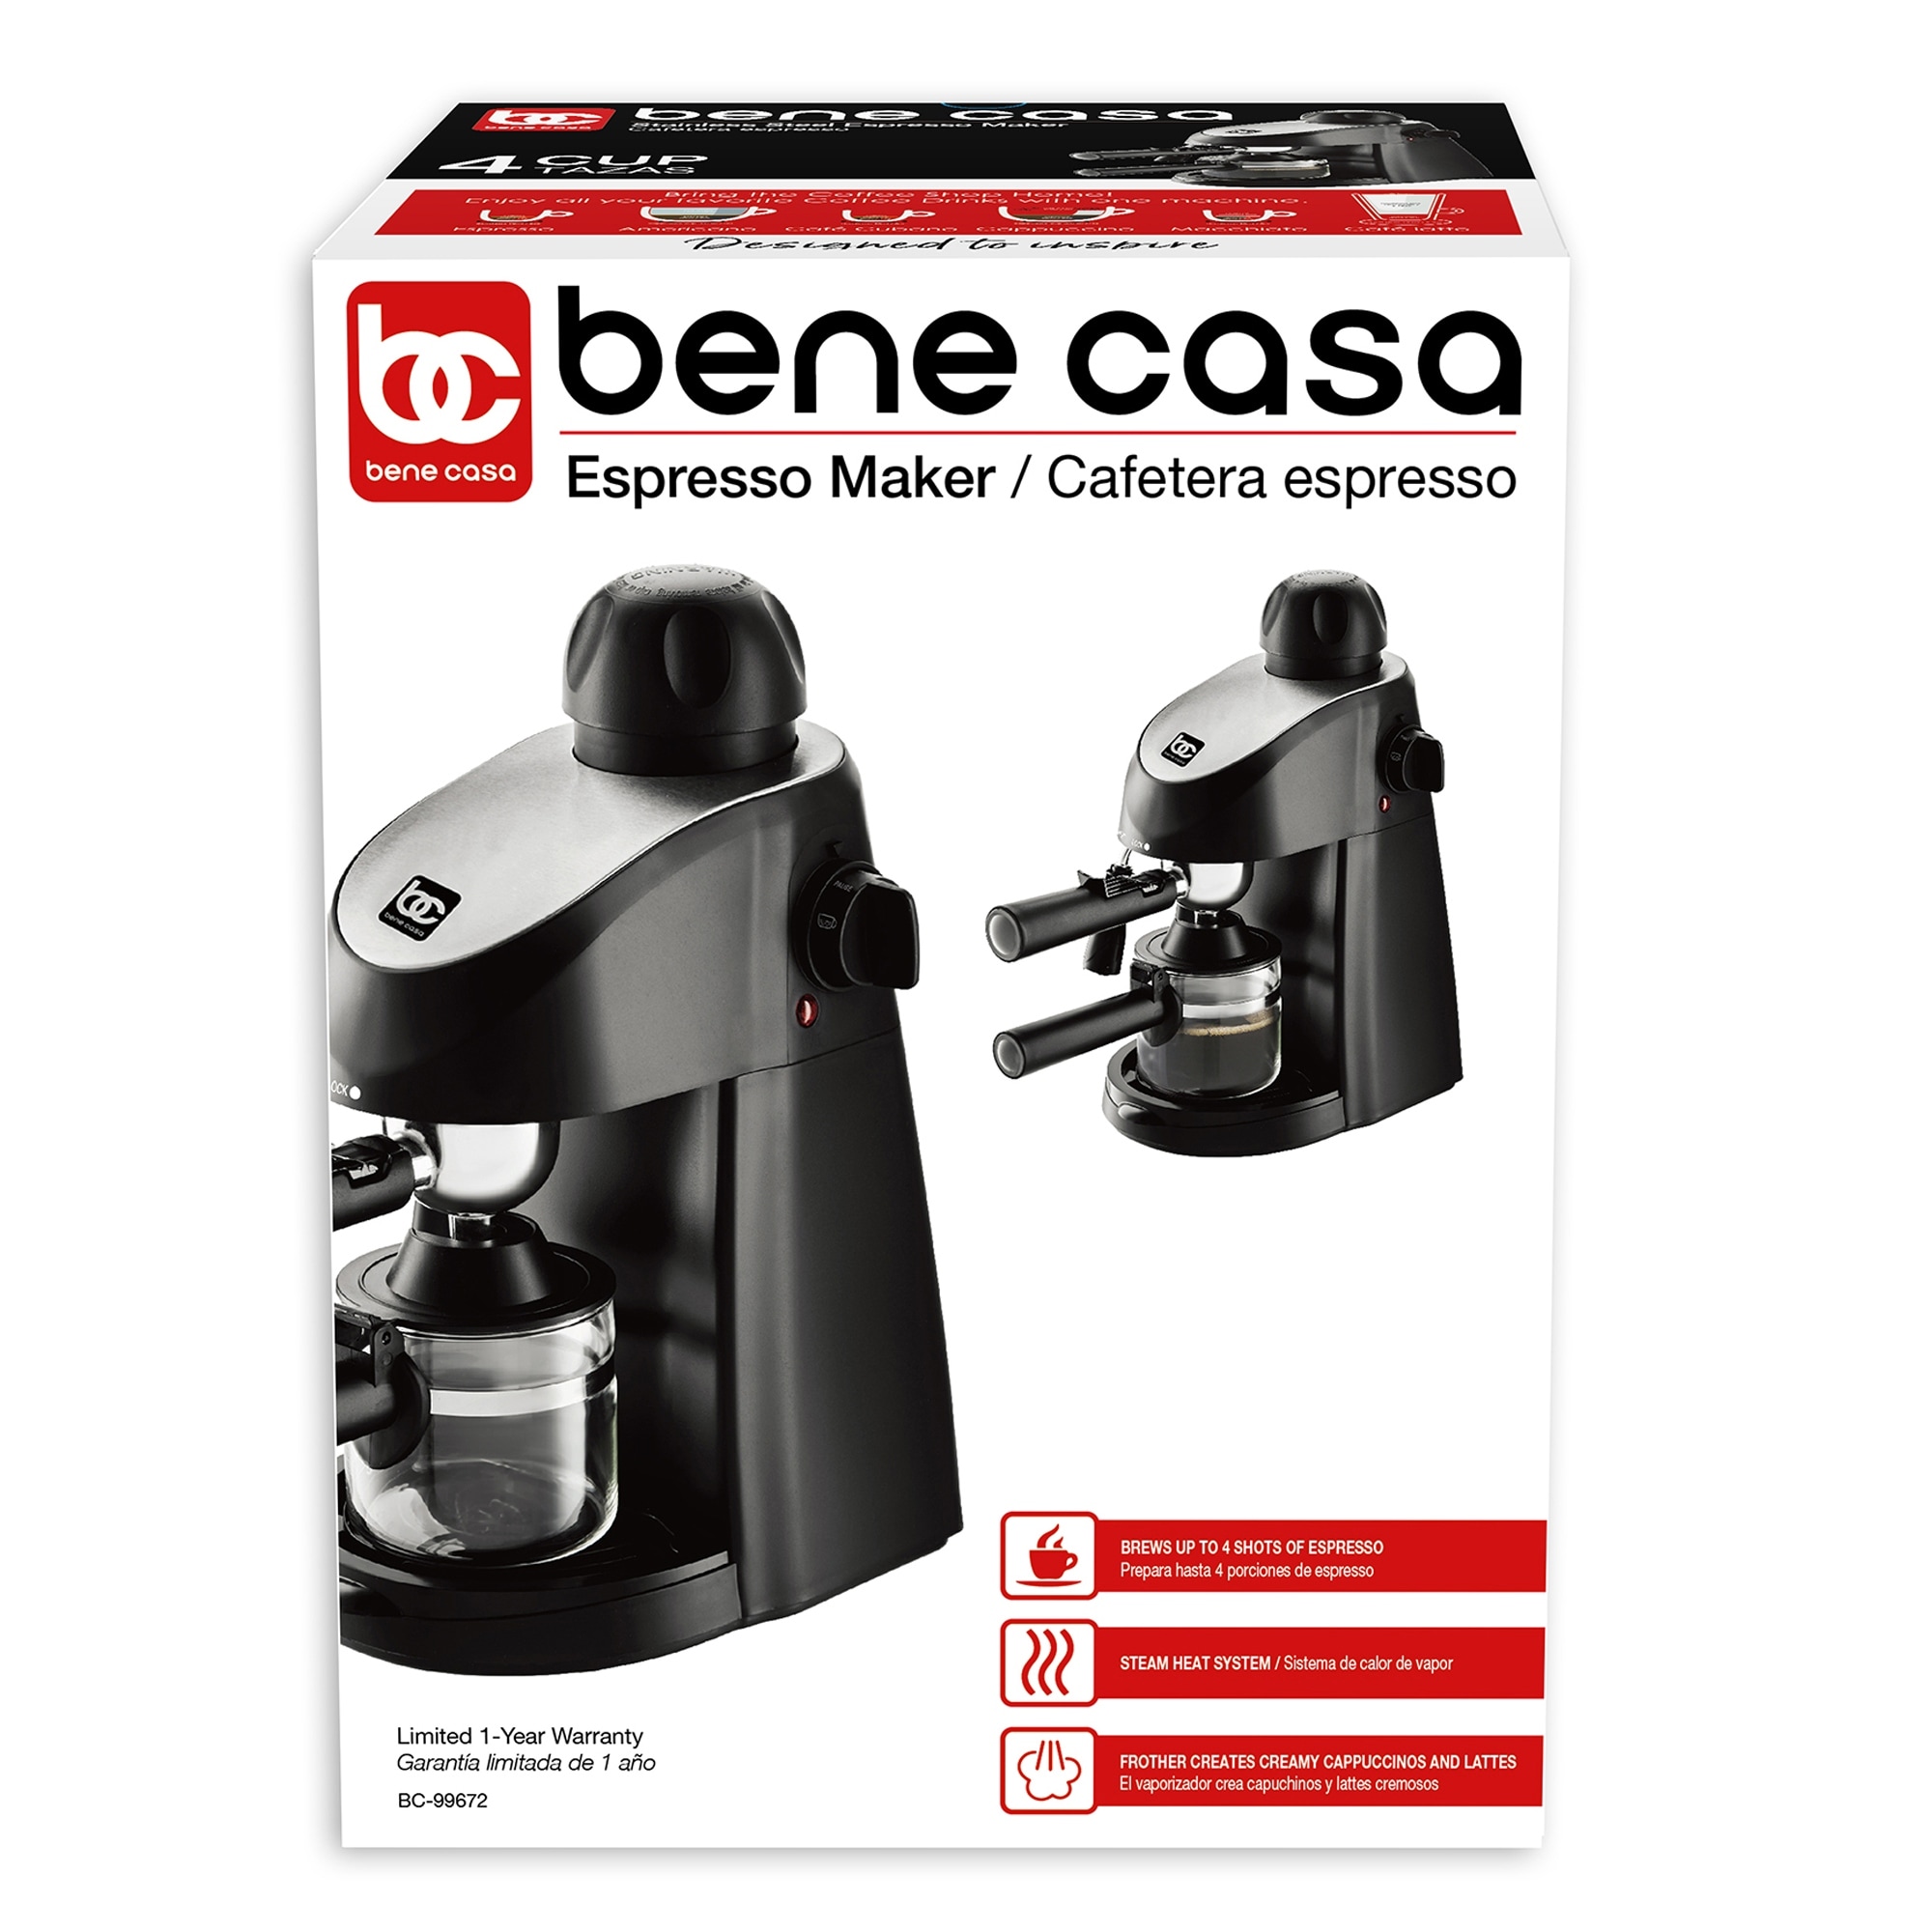 https://ak1.ostkcdn.com/images/products/is/images/direct/260200c7cd98f9010a0e1f677ddc37201c3402a6/Bene-Casa-4-cup-espresso-maker%2C-black%2C-milk-frother%2C-glass-carafe-coffee-maker.jpg